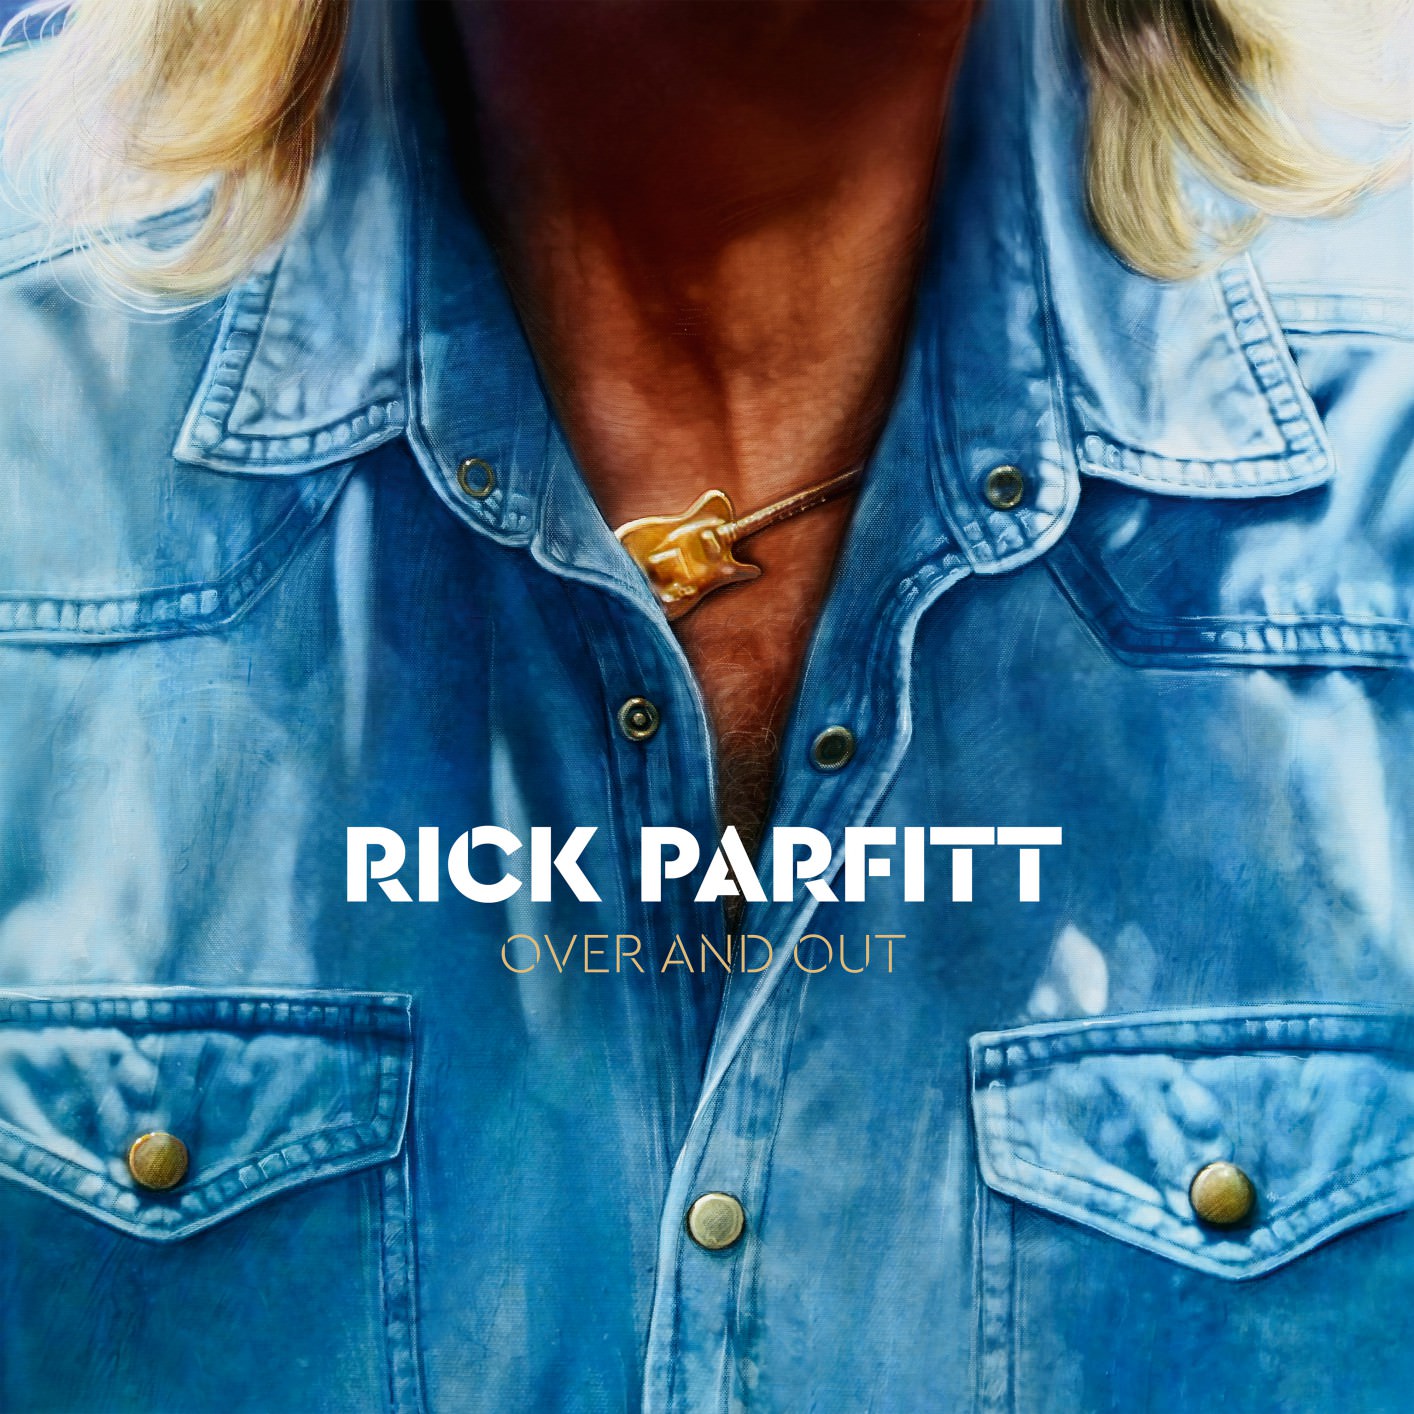 Rick Parfitt - Over And Out (2018) [HDTracks FLAC 24bit/44,1kHz]